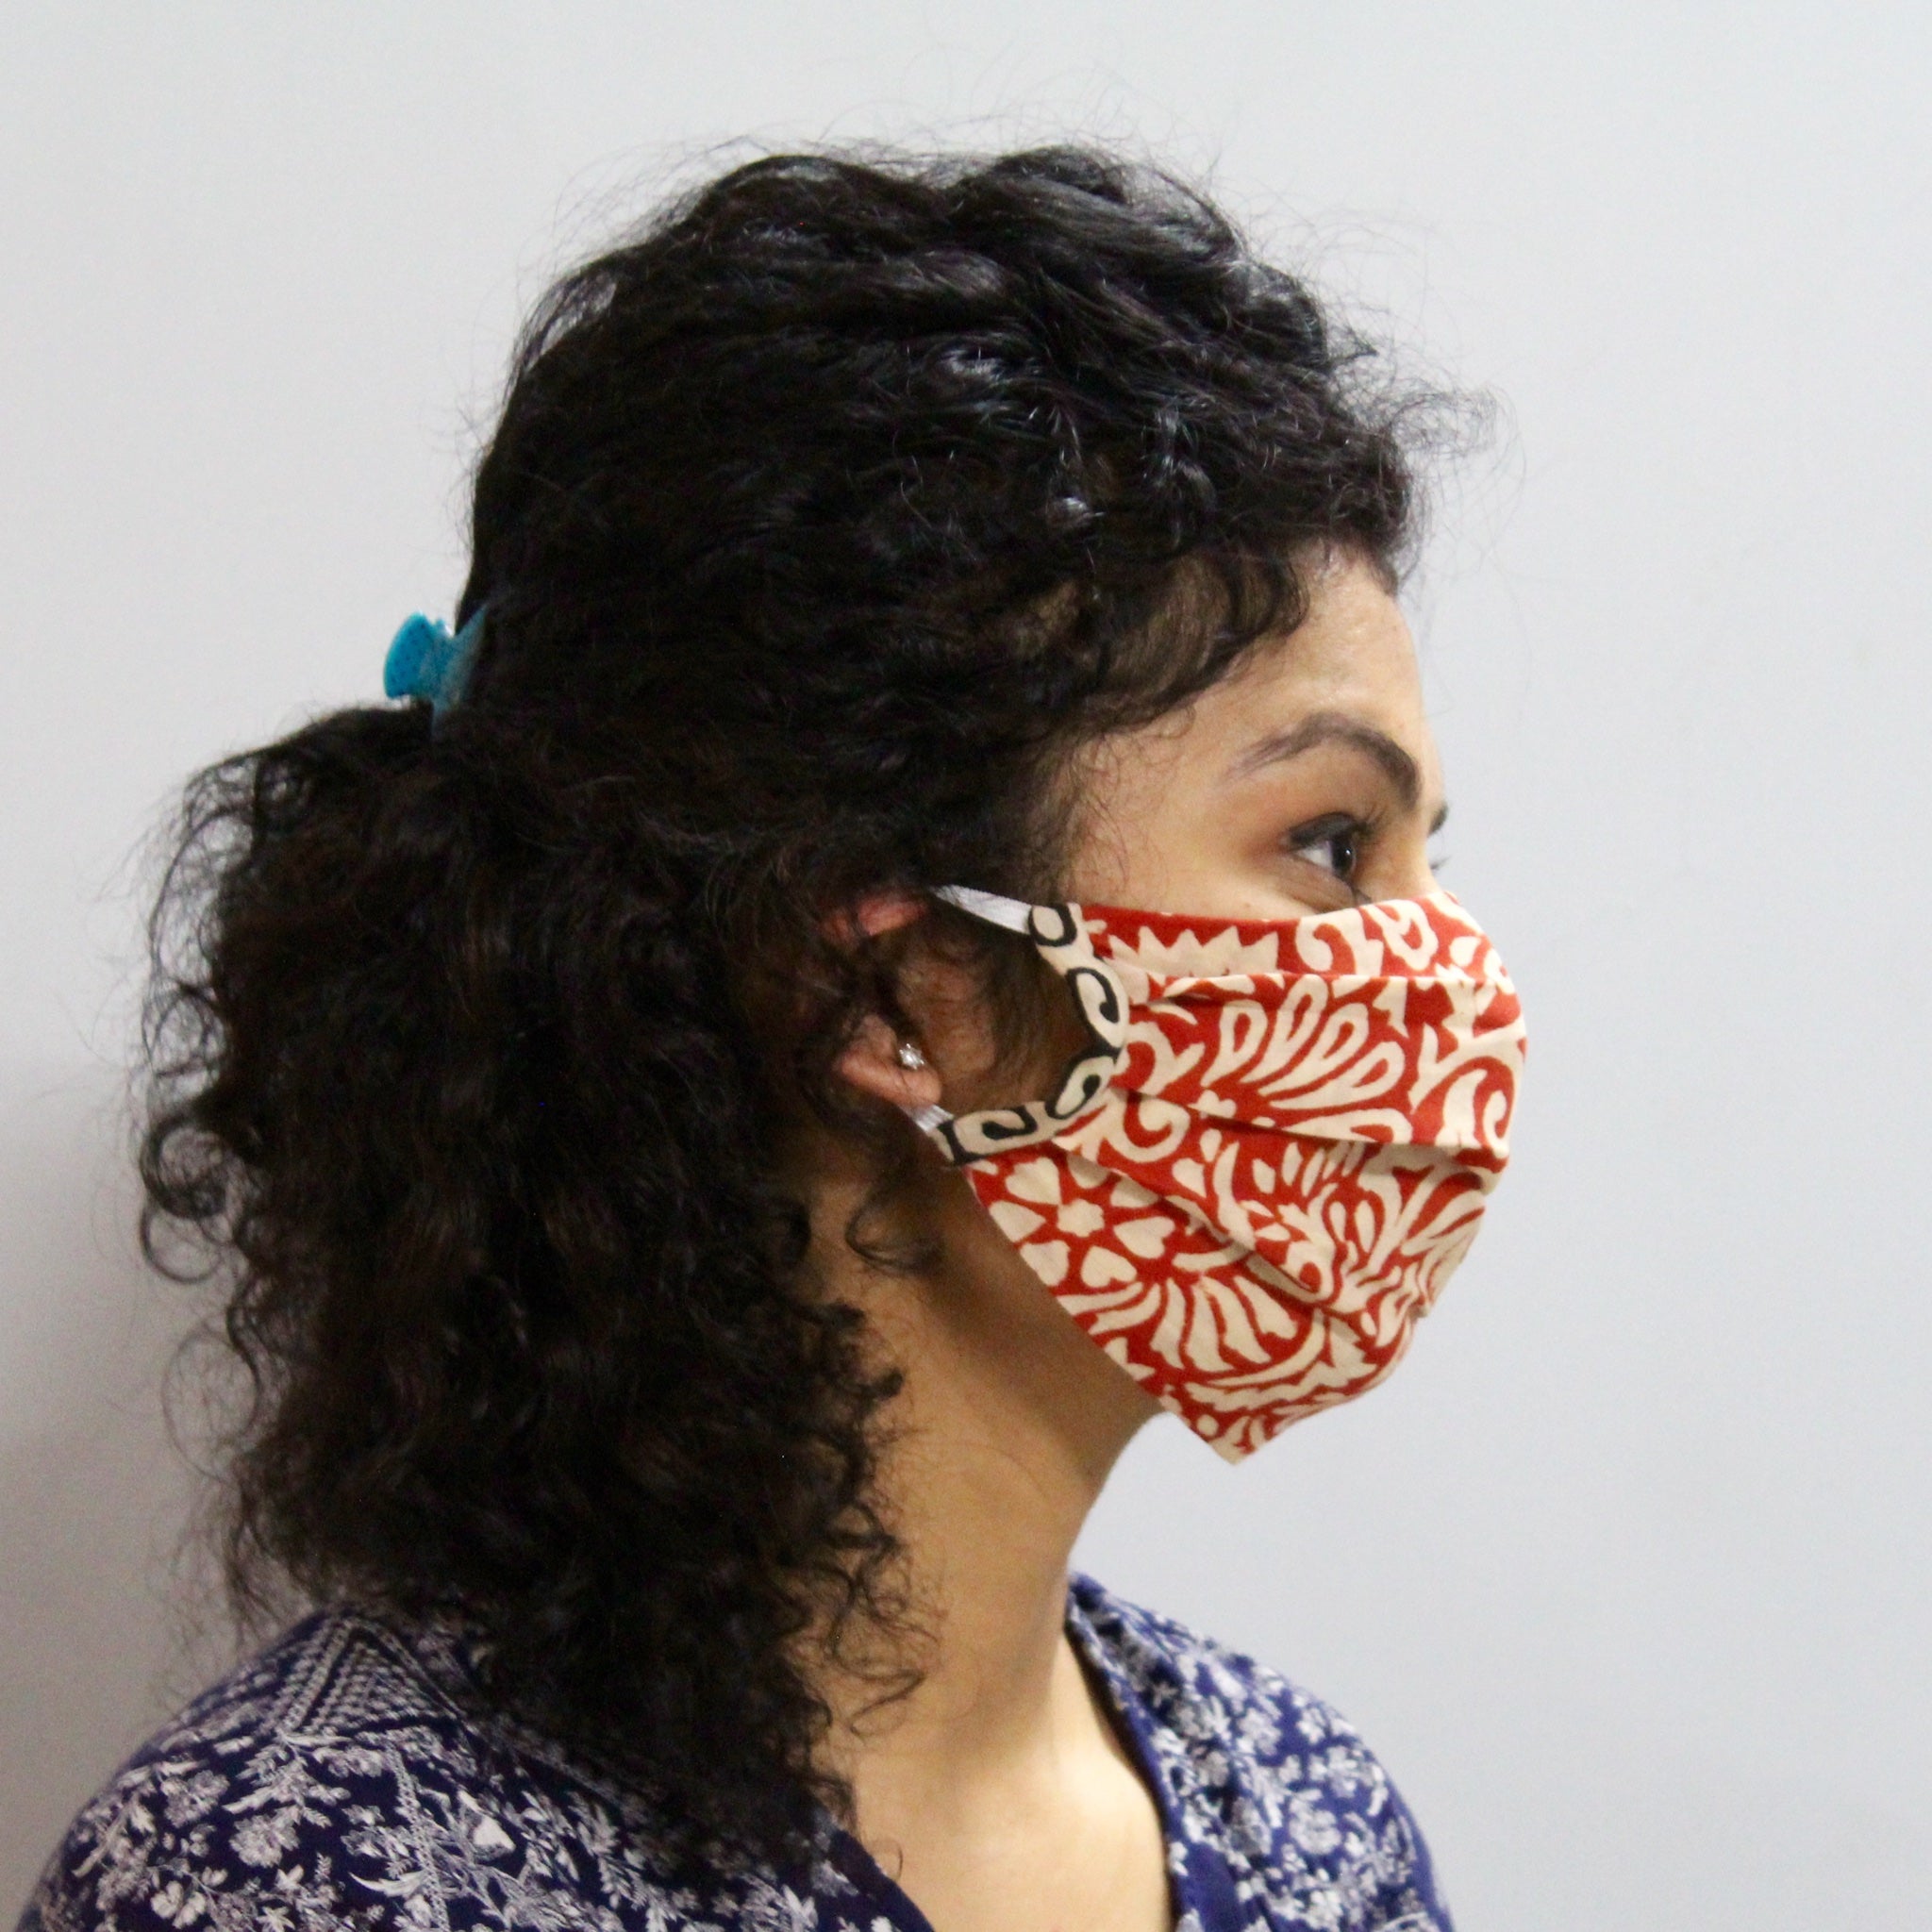 Hand Block Print  Double Layer Mask with Contrasting Piping